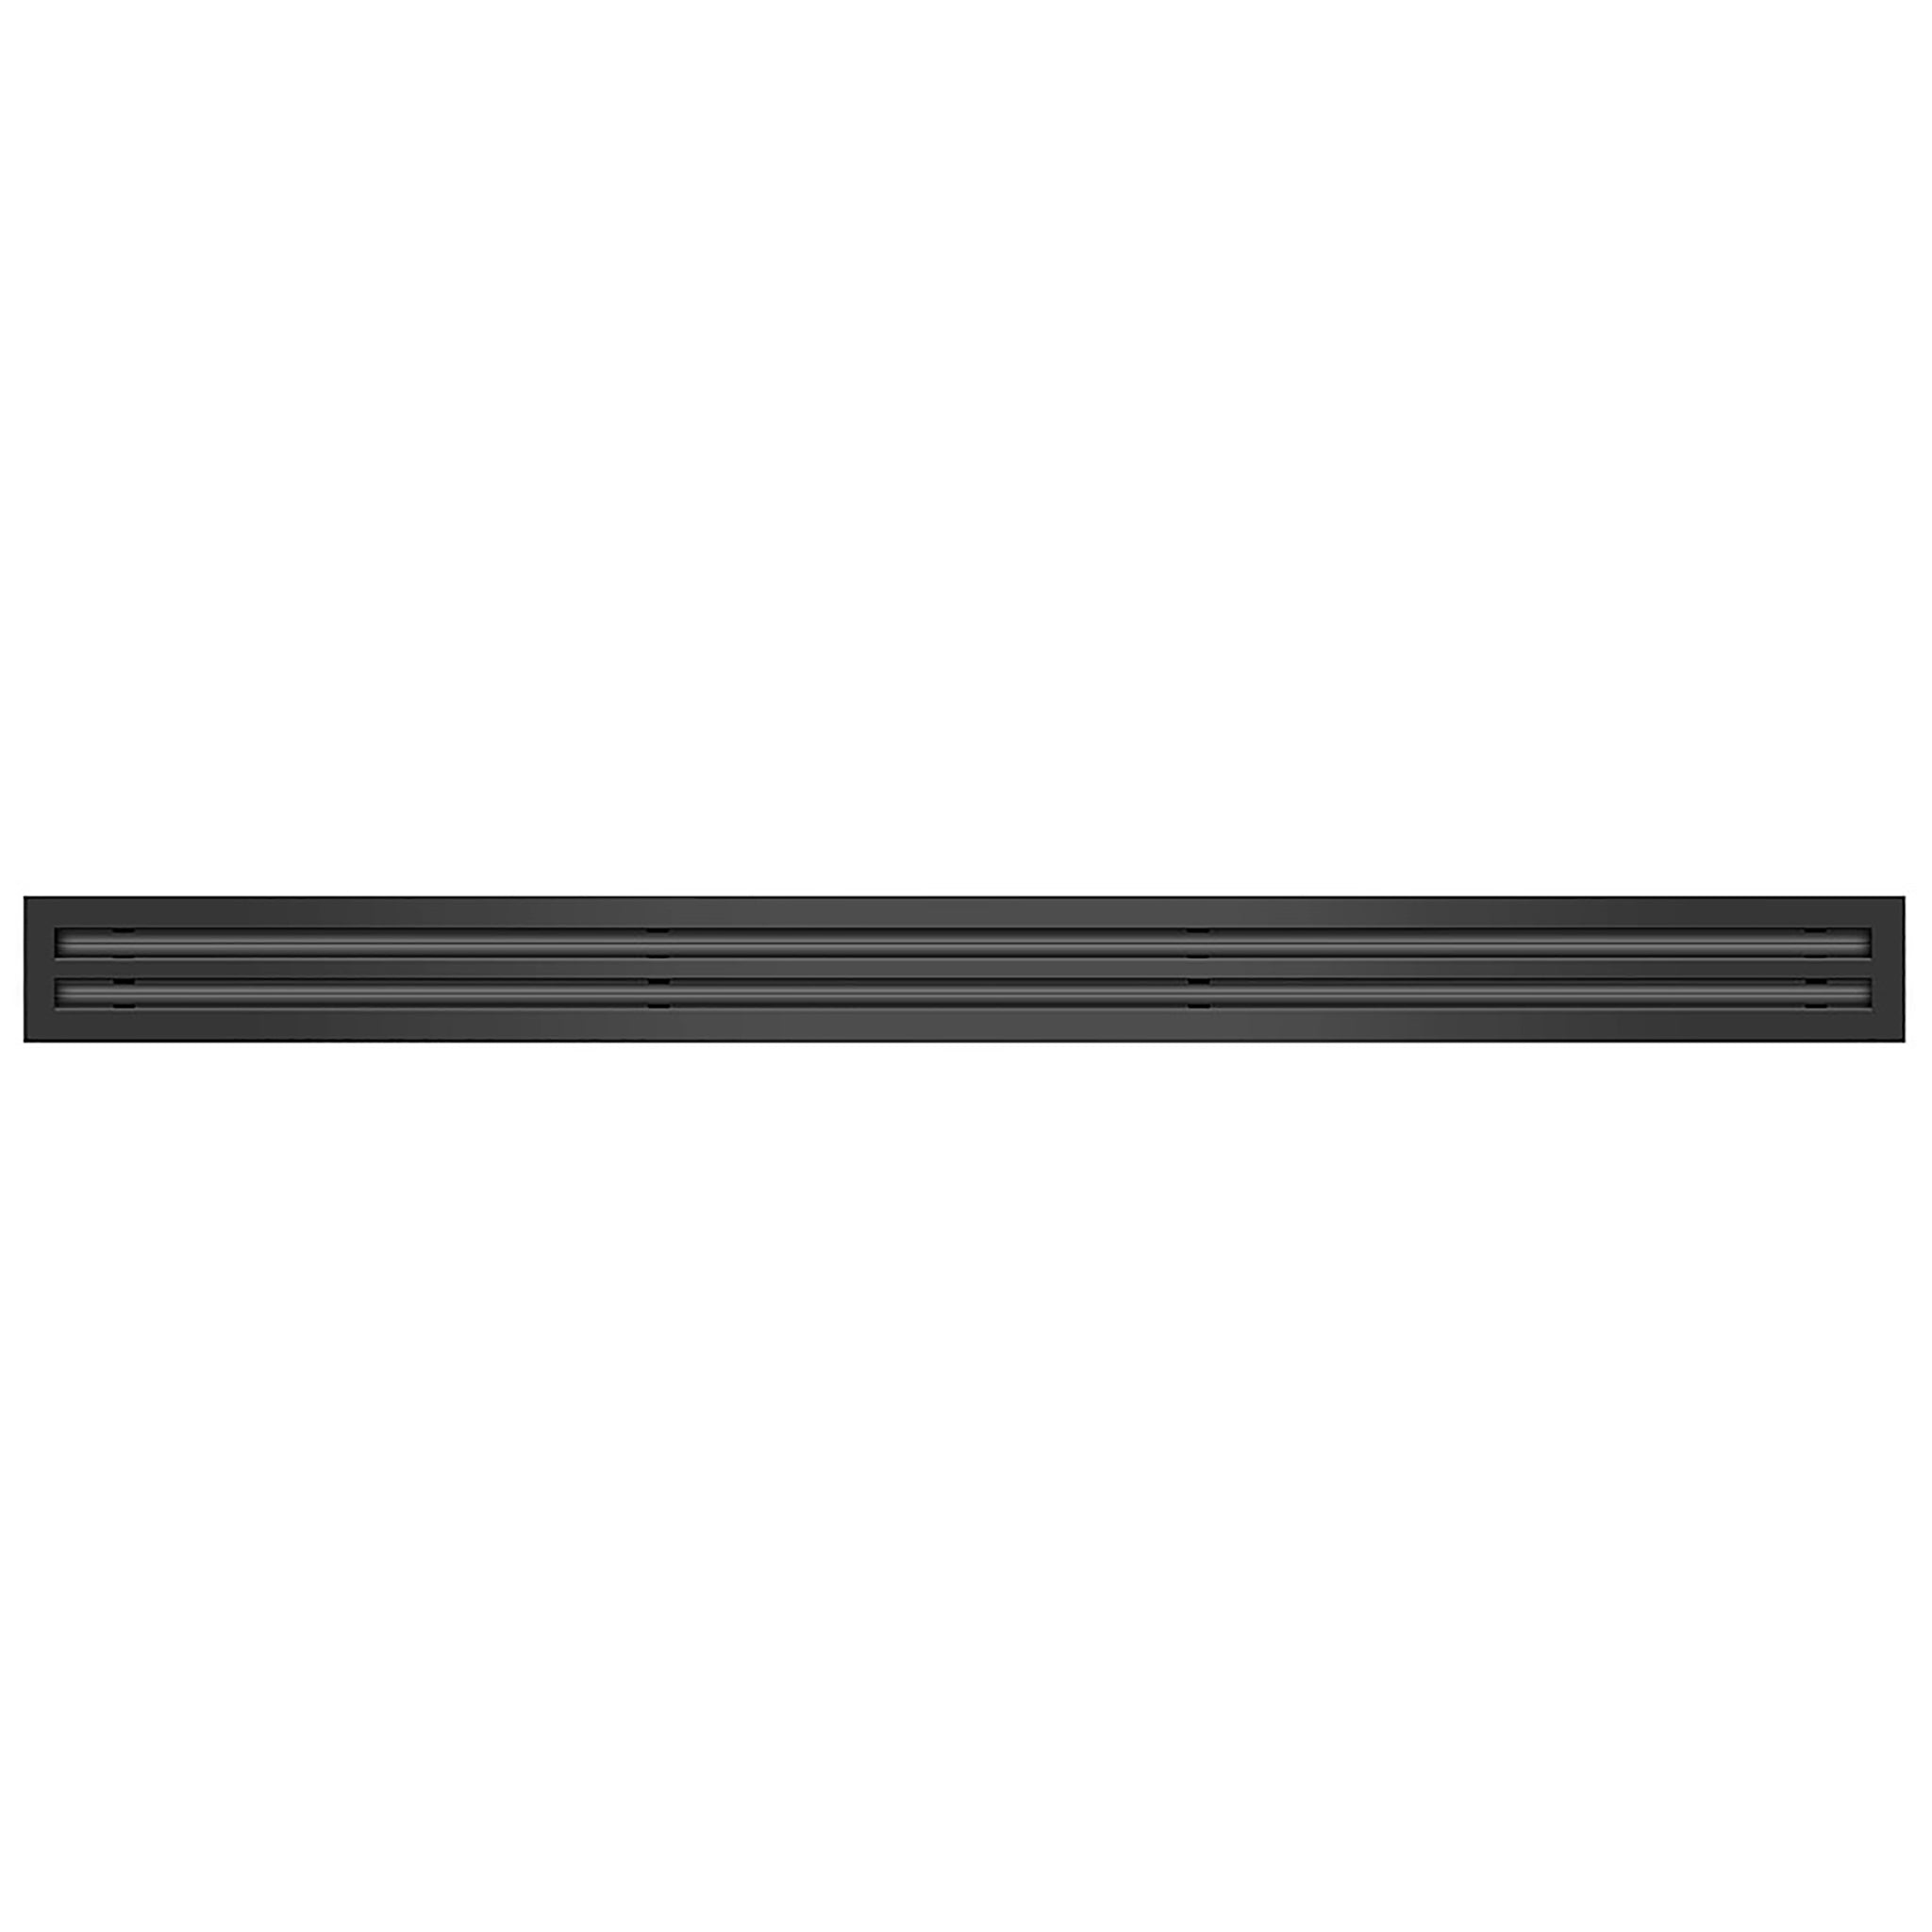 Front of 48 Inch 2 Slot Linear Air Vent Cover Black - 48 Inch 2 Slot Linear Diffuser Black - Texas Buildmart